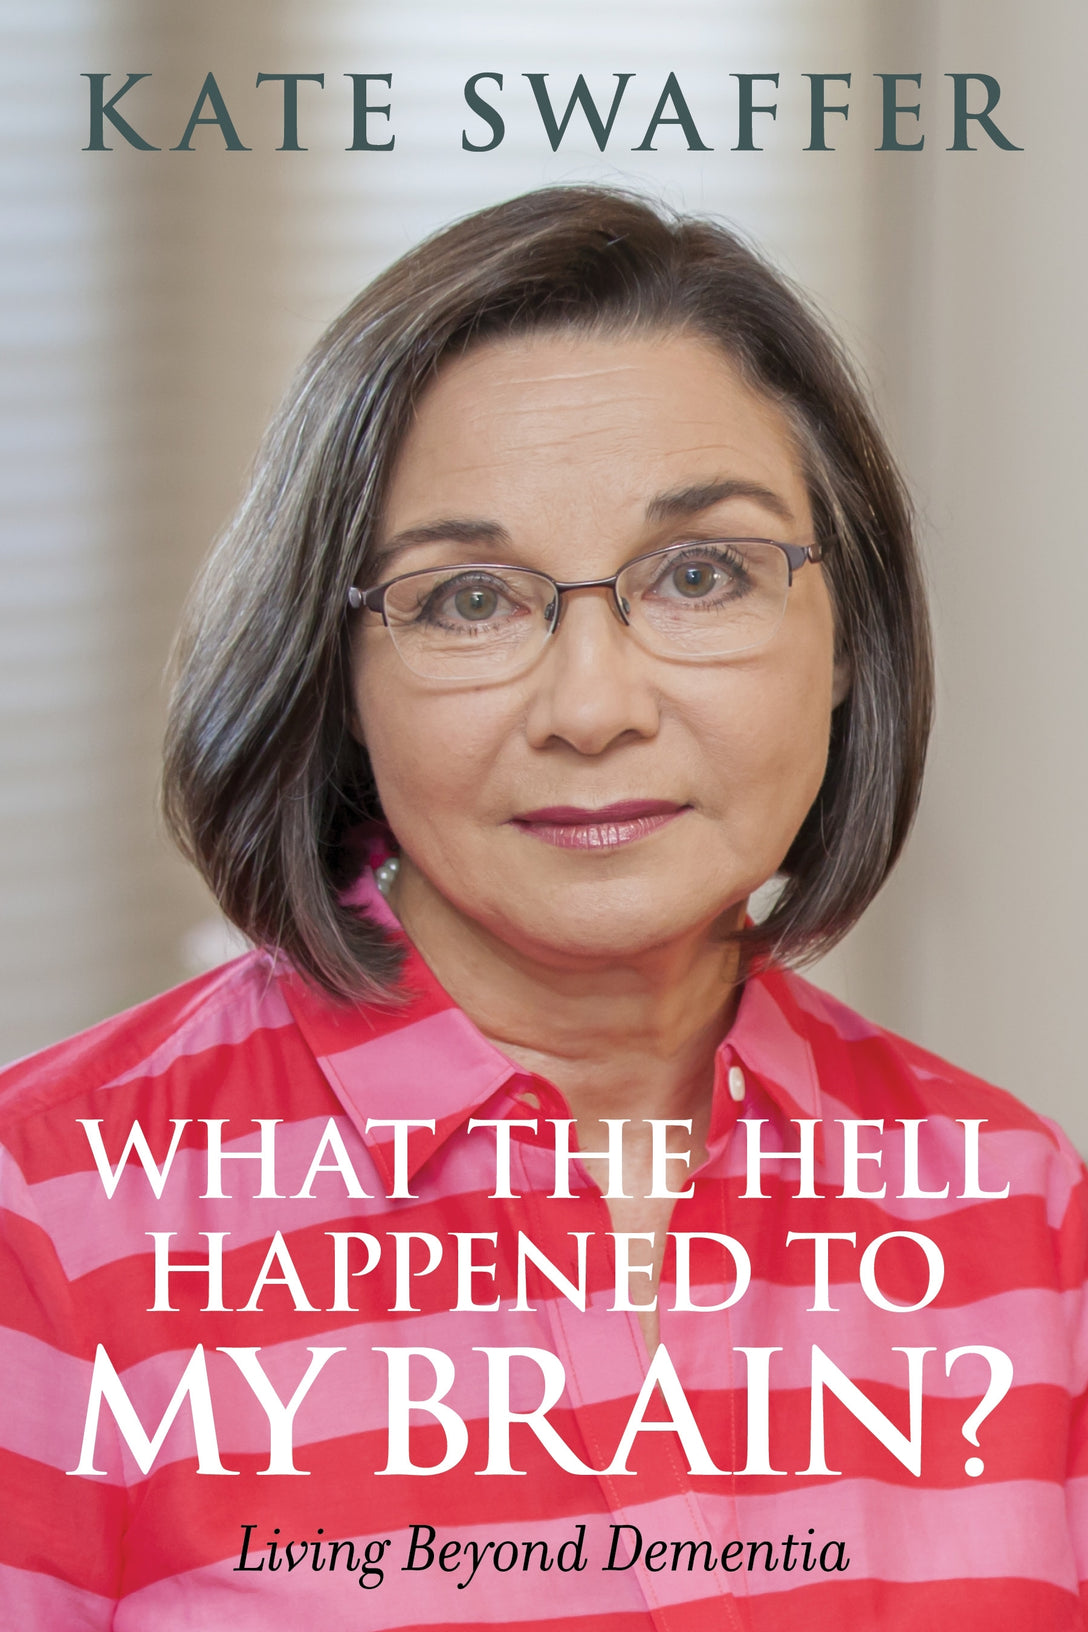 What the hell happened to my brain? by Kate Swaffer, Dr Shibley Rahman, Glenn Rees, Richard Taylor